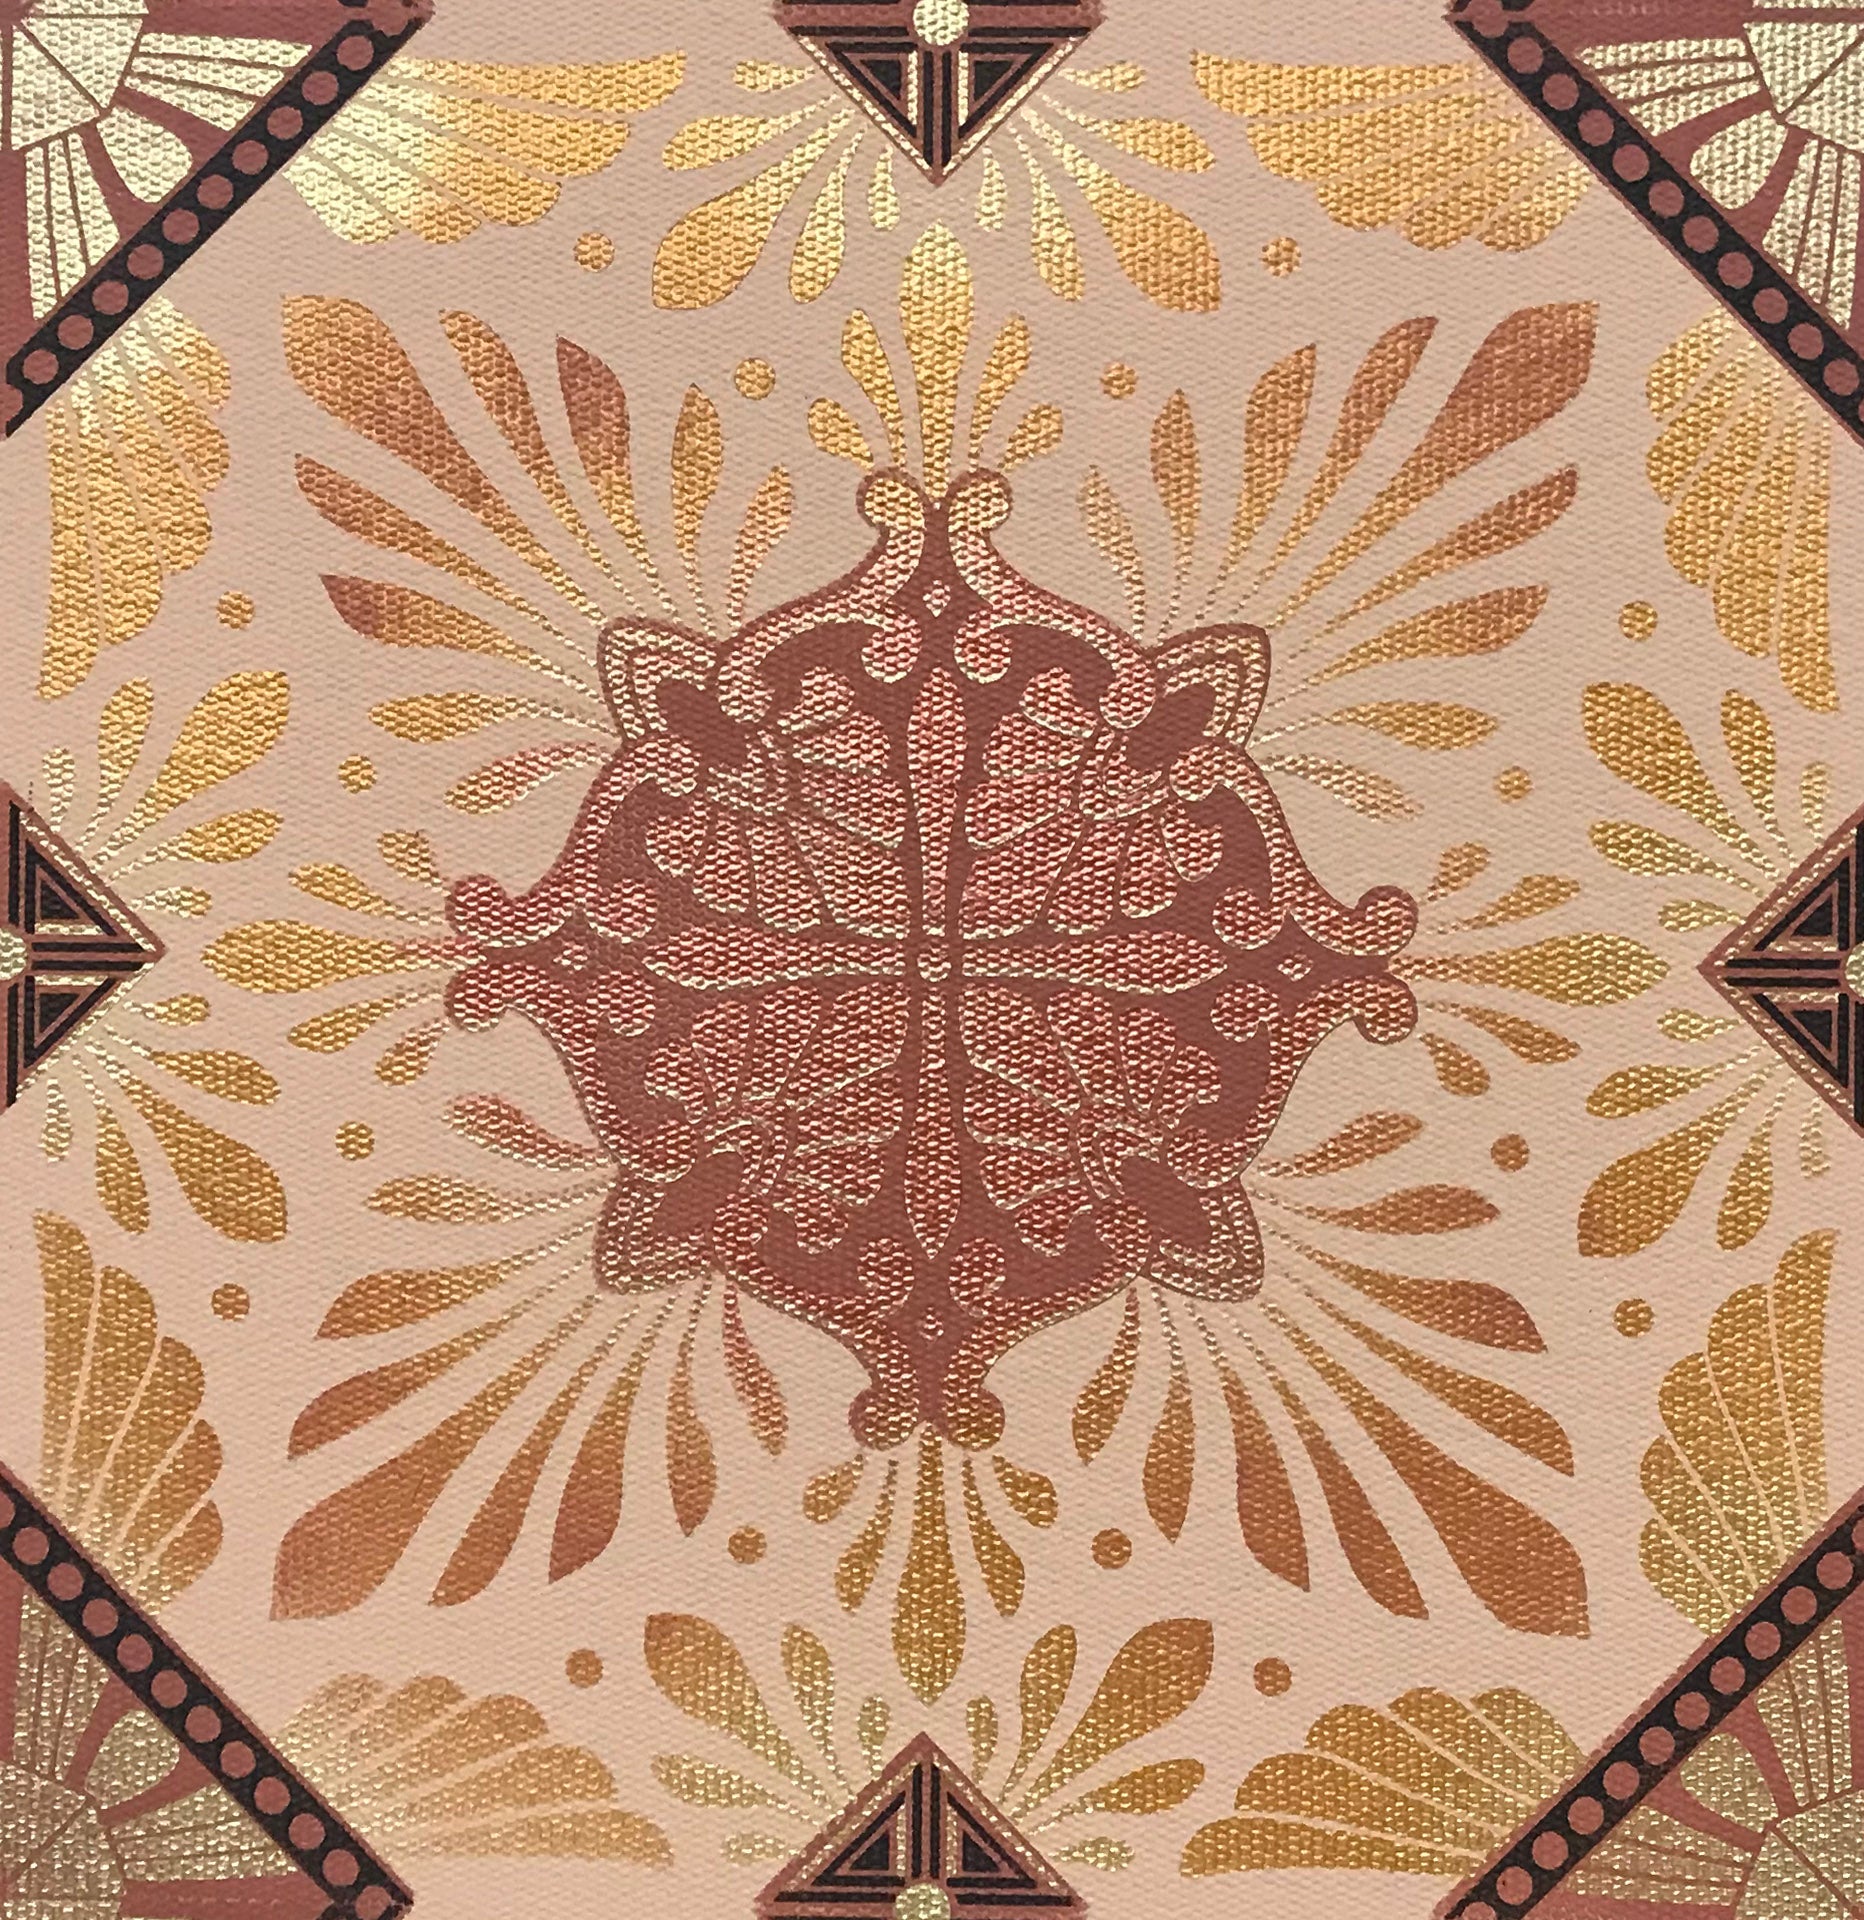 A close up of the central motif in this floorcloth, Greek Deco #3, based on a pattern from Christopher Dresser's "Studies in Design", c.1875.